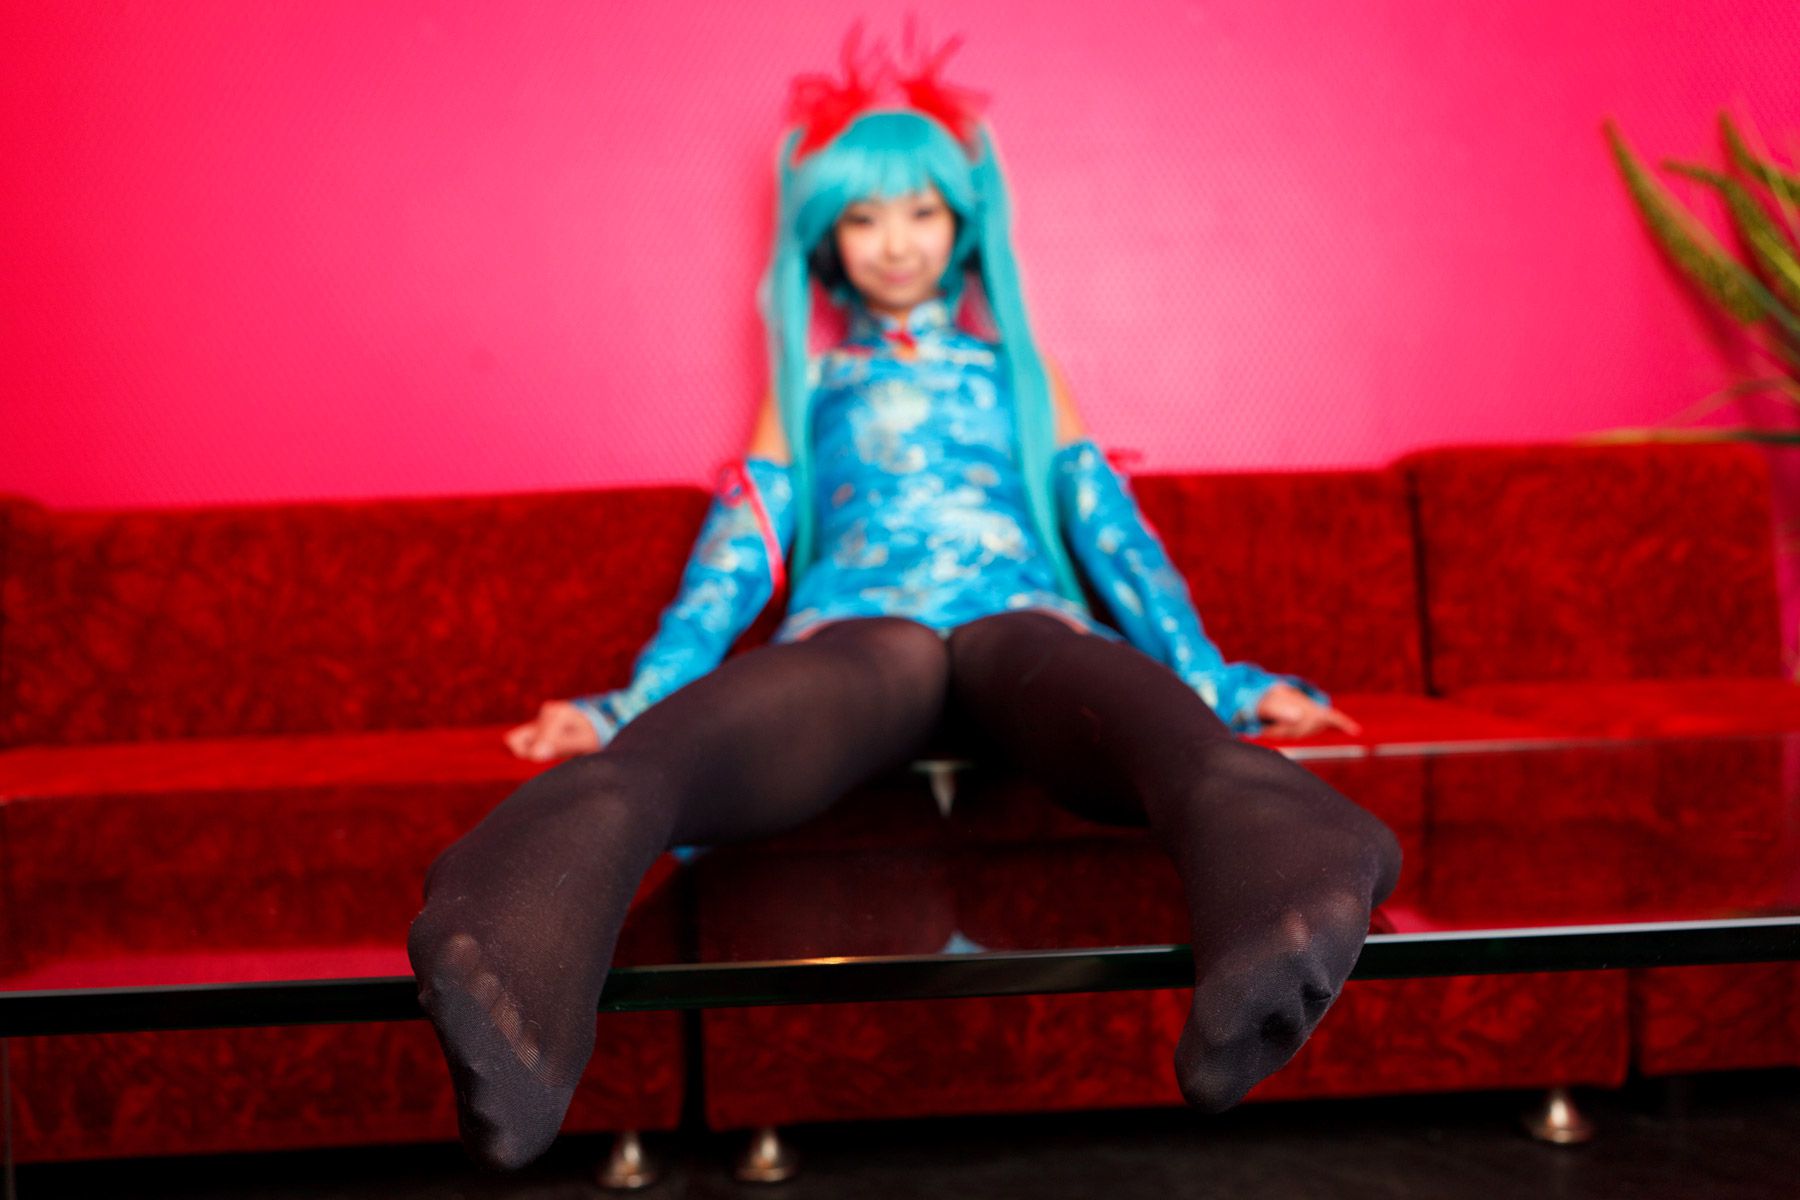 taotuhome[Cosplay] Necoco as Hatsune Miku from Vocaloid 套图第62张